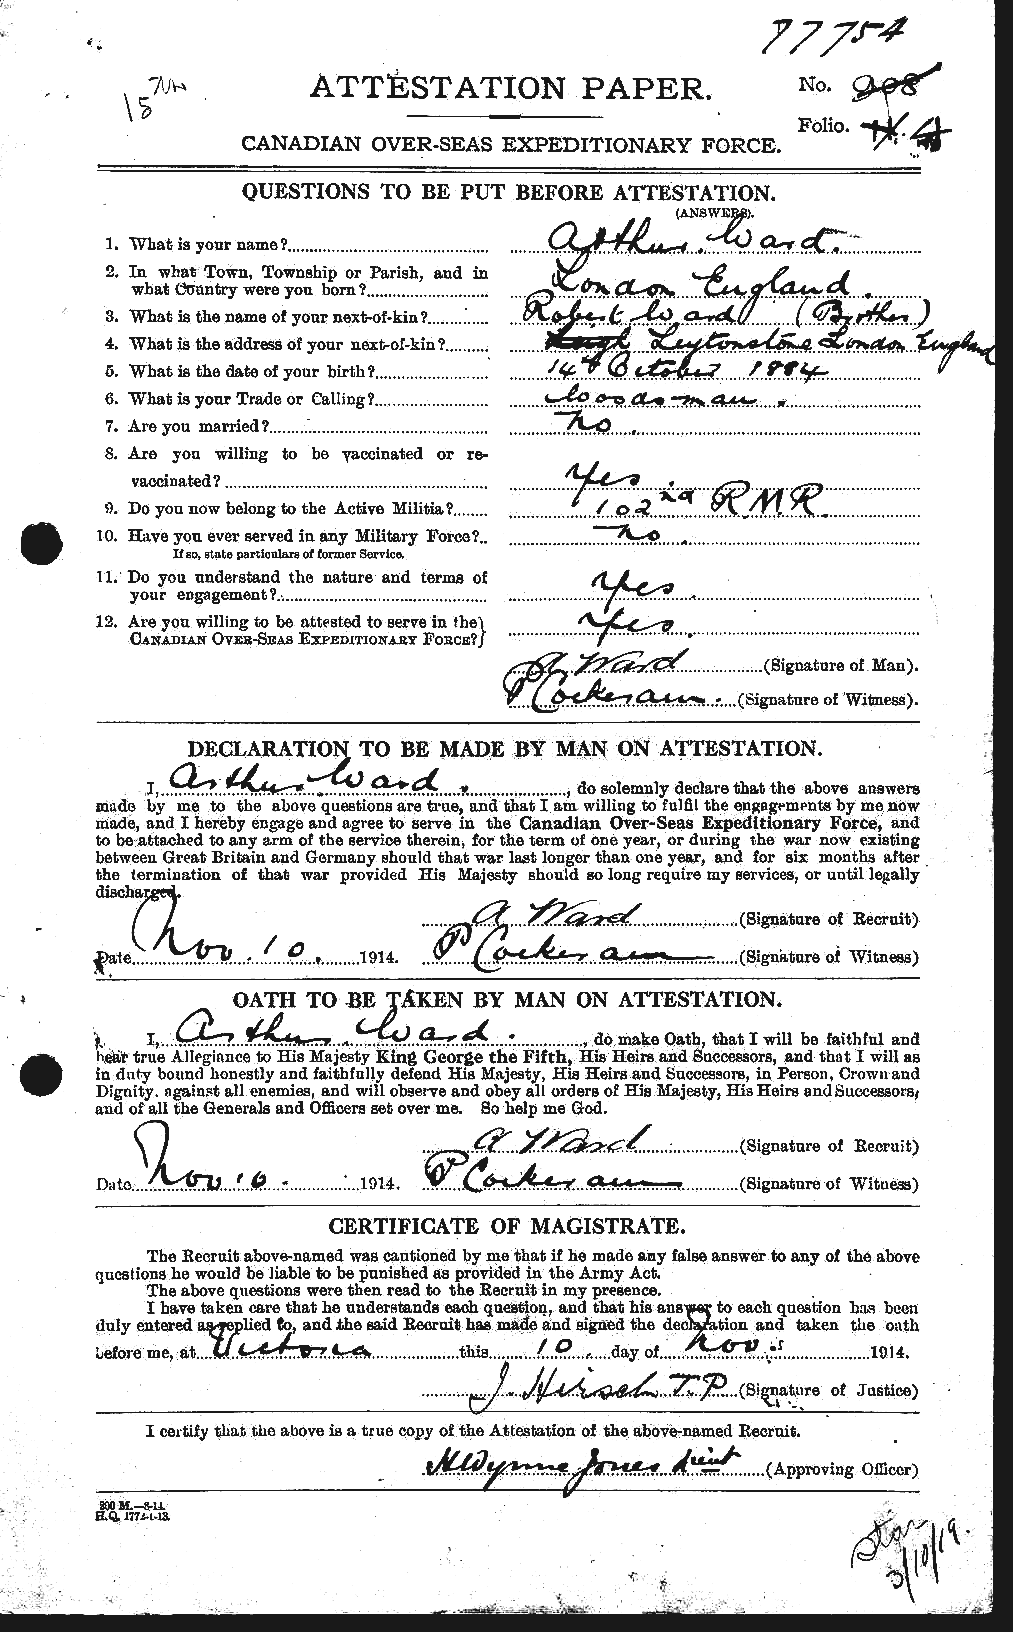 Personnel Records of the First World War - CEF 655141a